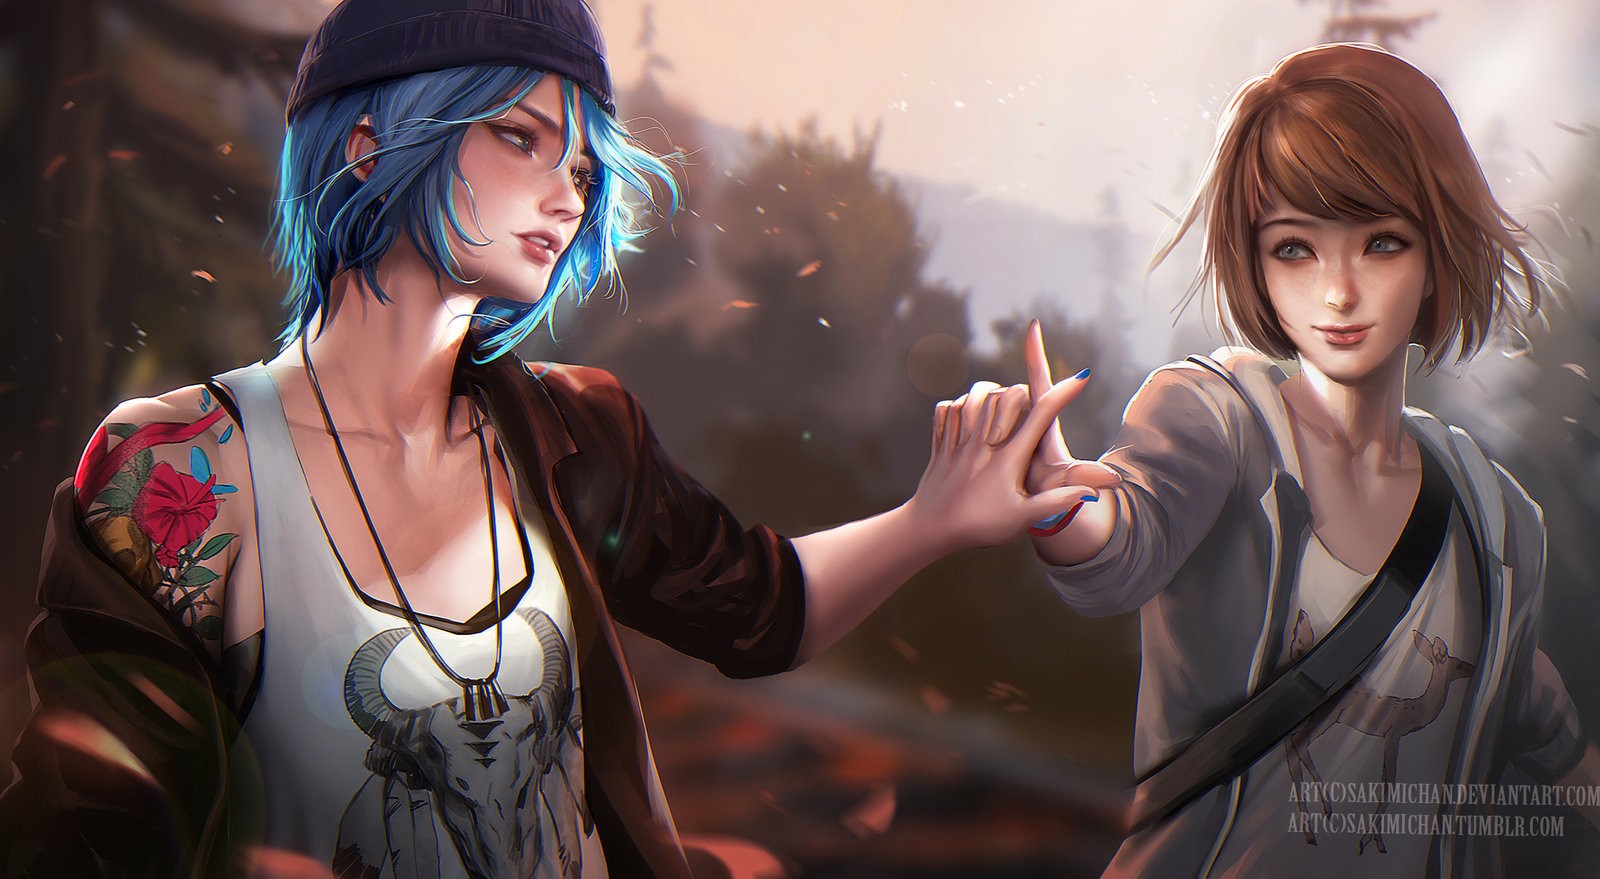 Max Caulfield Chloe Price Sakimichan Holding Hands Video Game Girls Video Game Characters